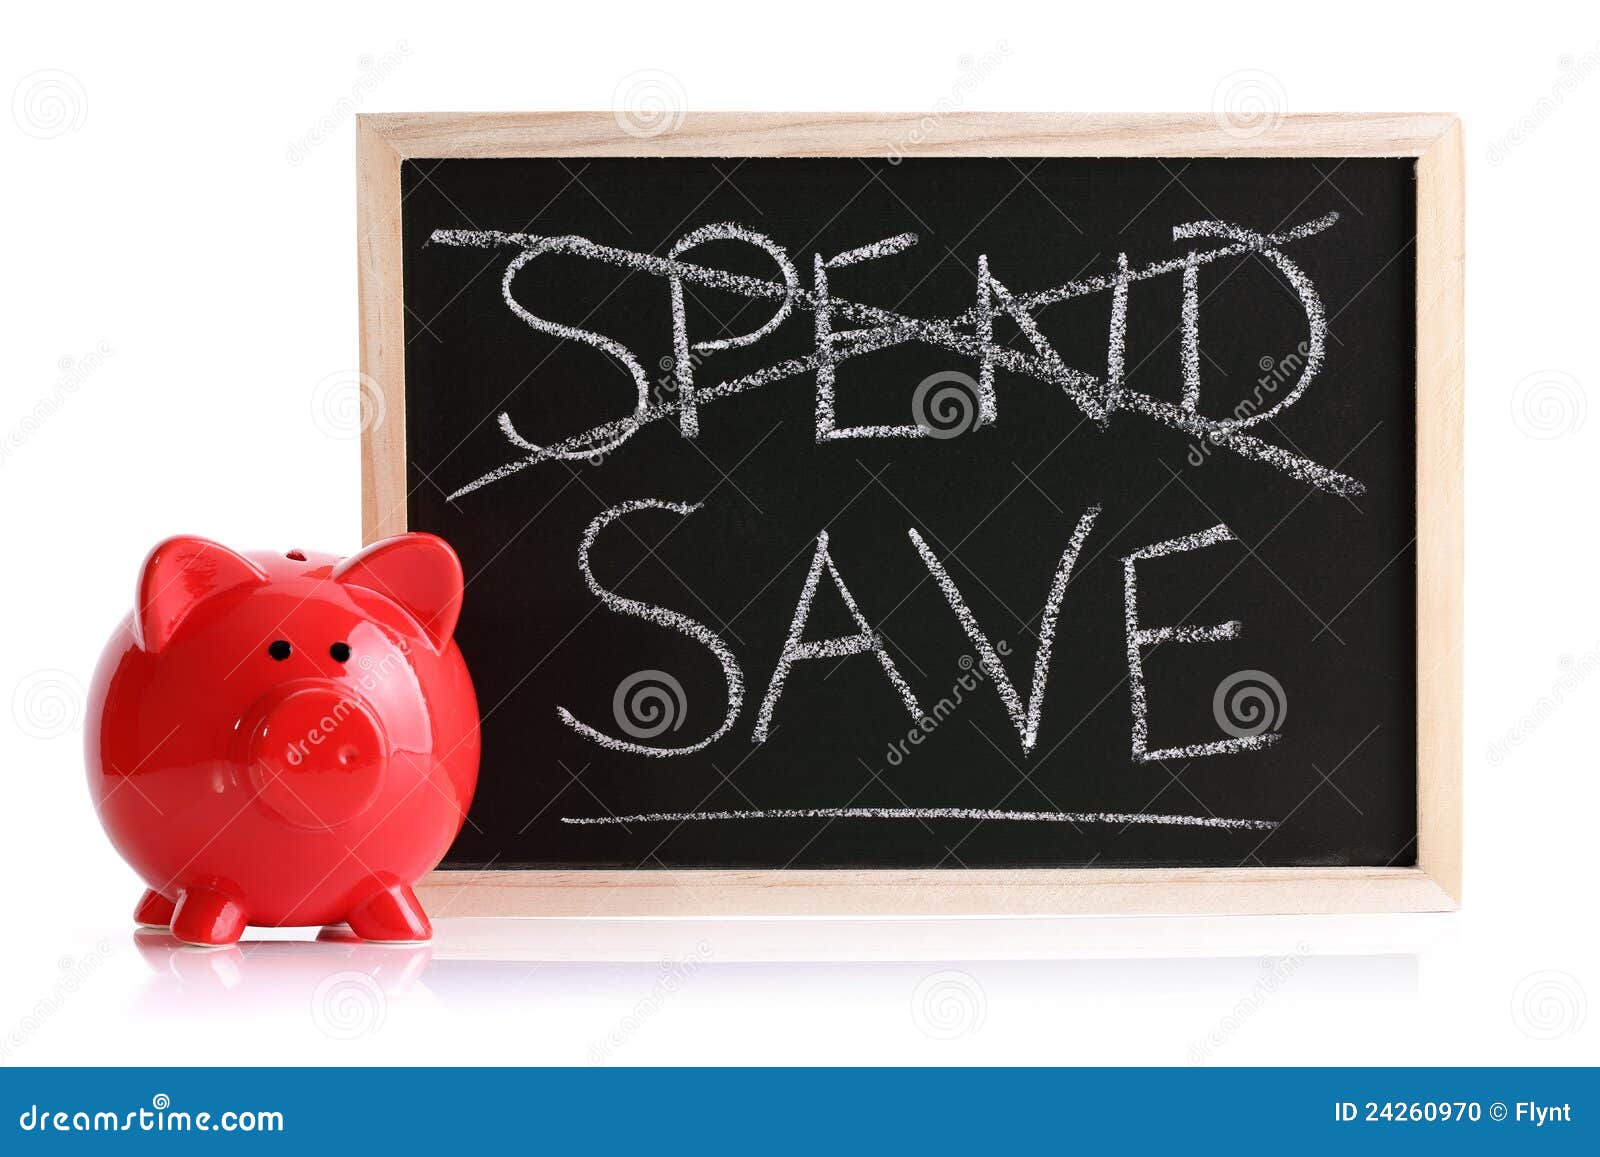 piggy bank spend or save